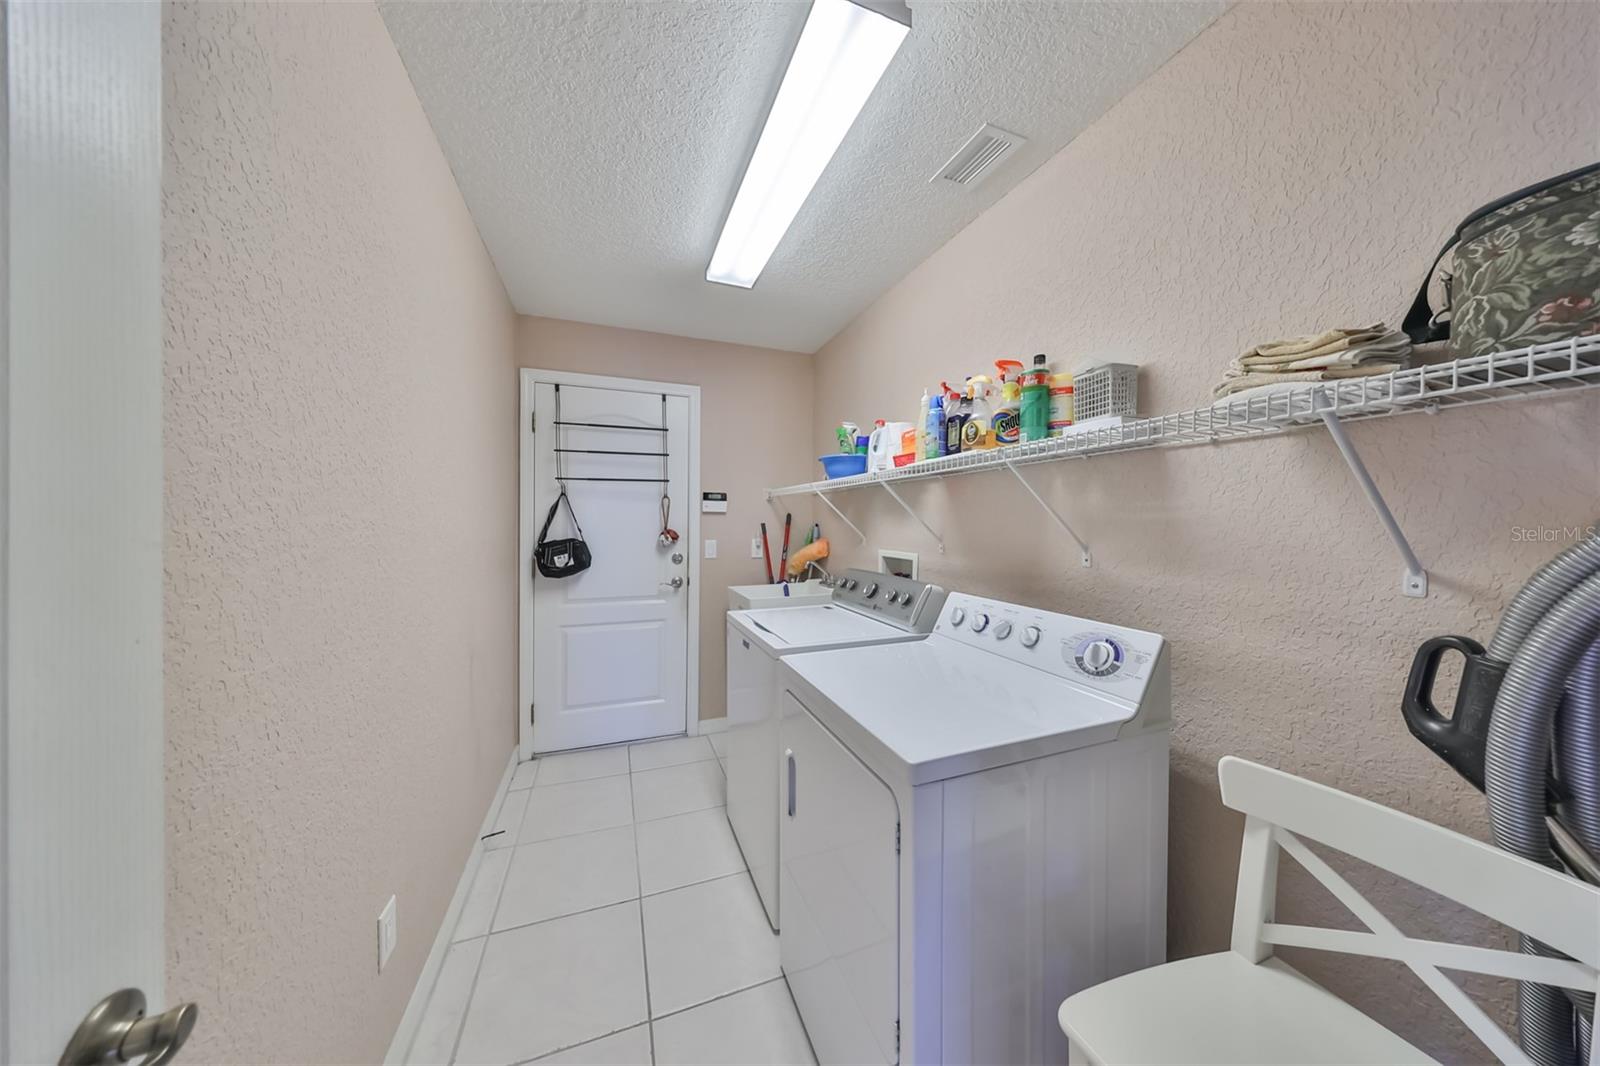 9. Laundry Room with entry to garage